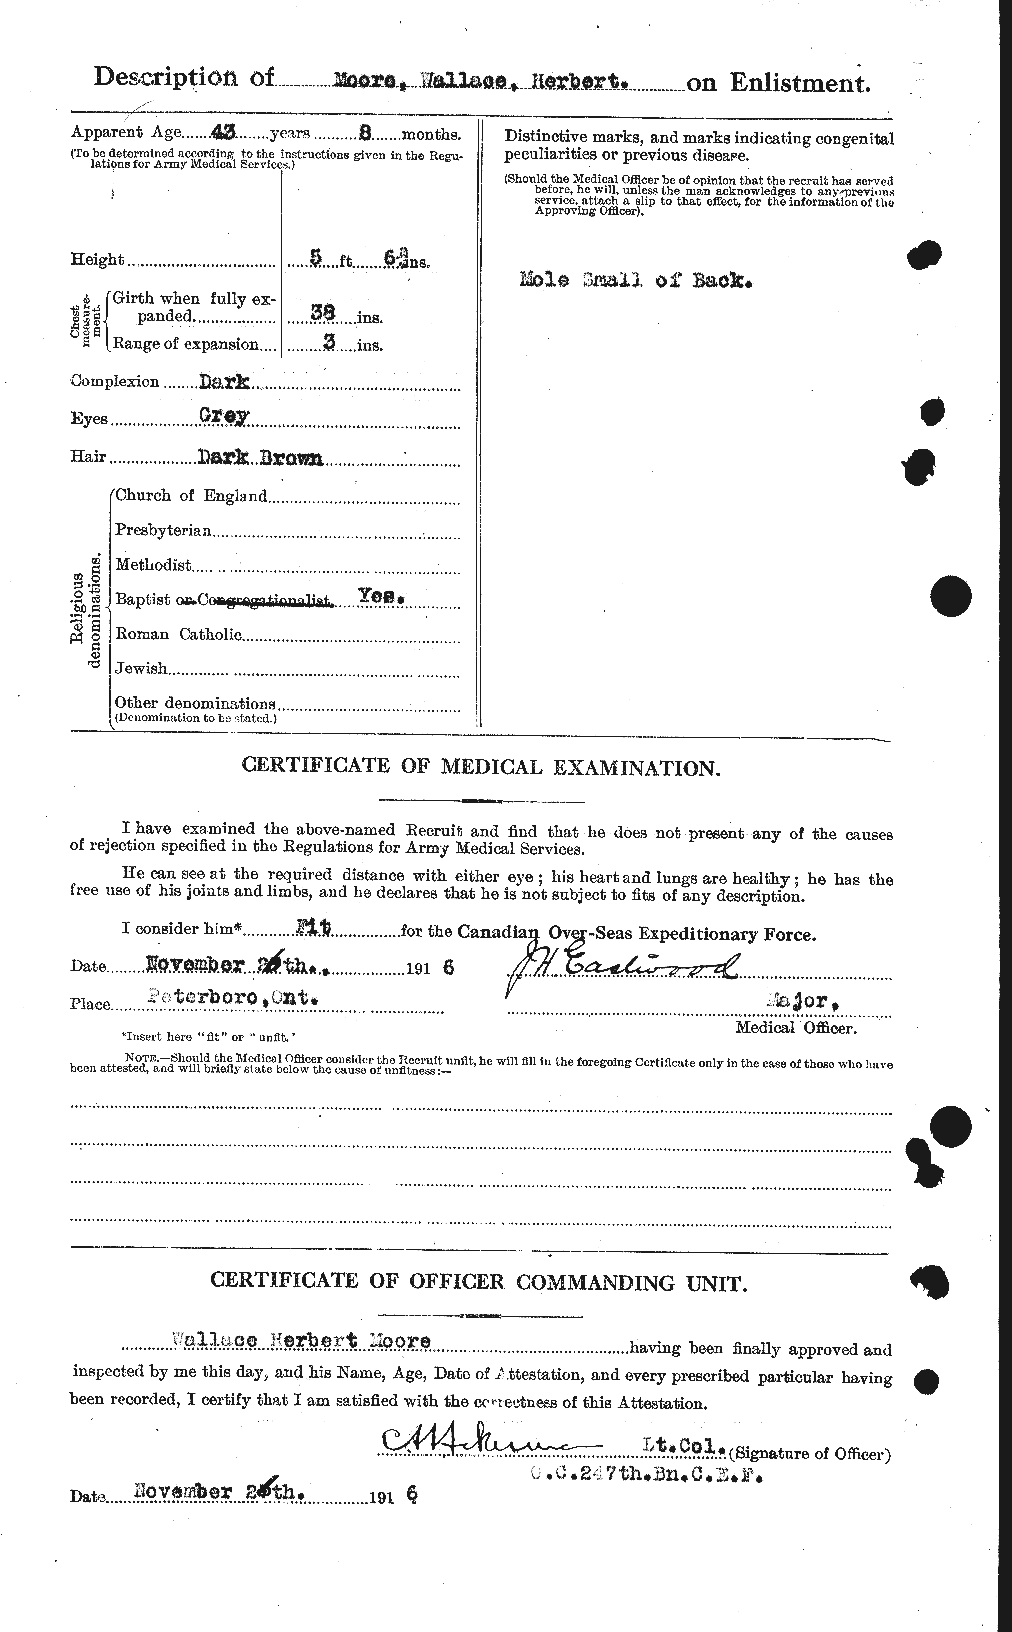 Personnel Records of the First World War - CEF 505685b